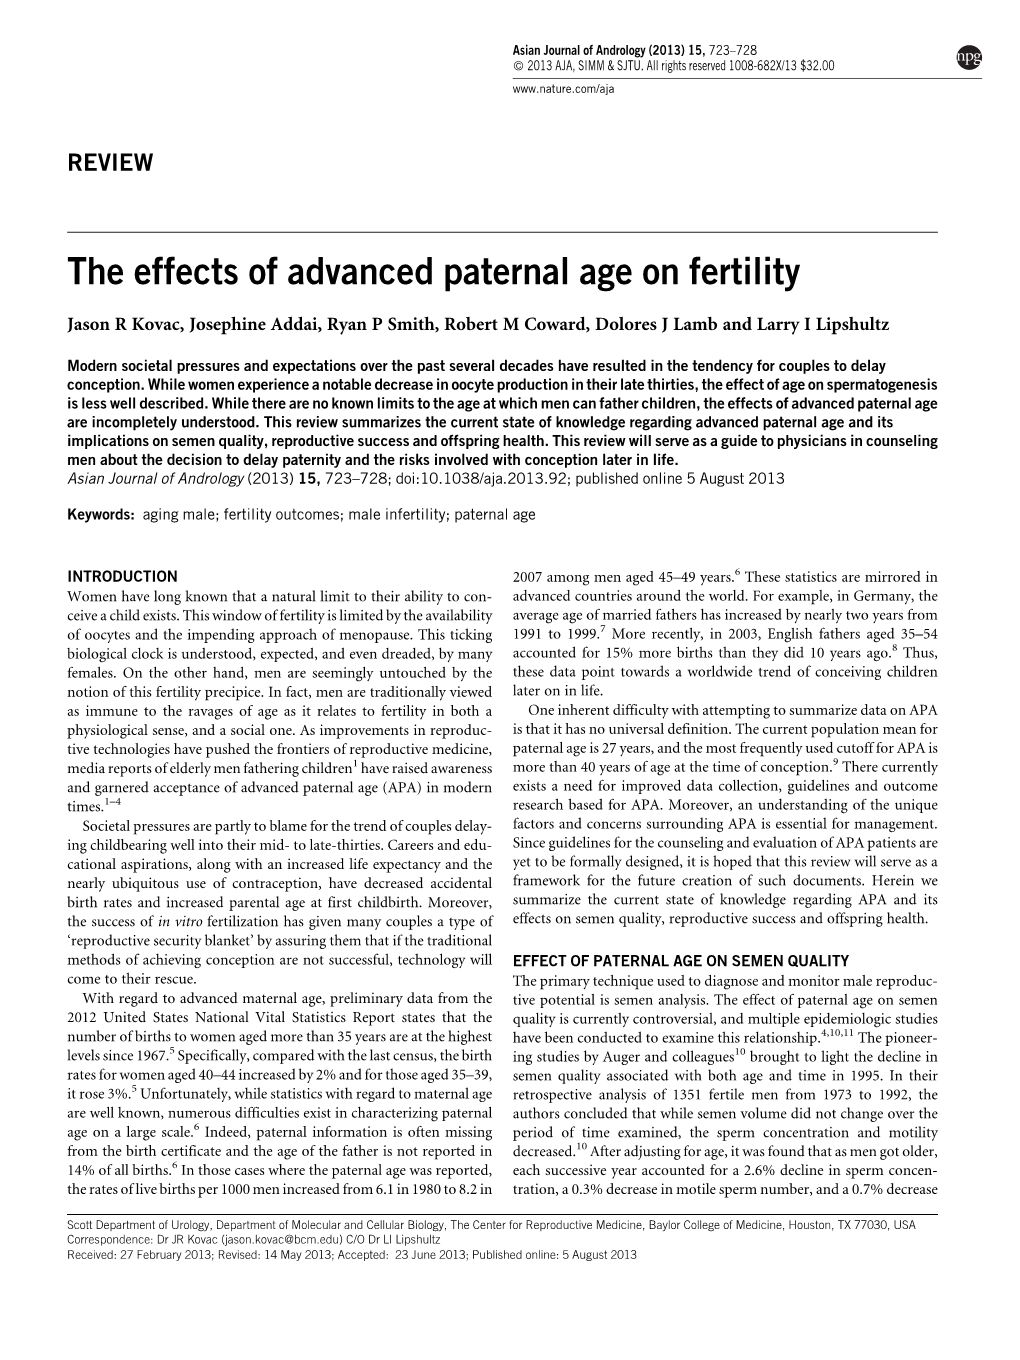 The Effects of Advanced Paternal Age on Fertility